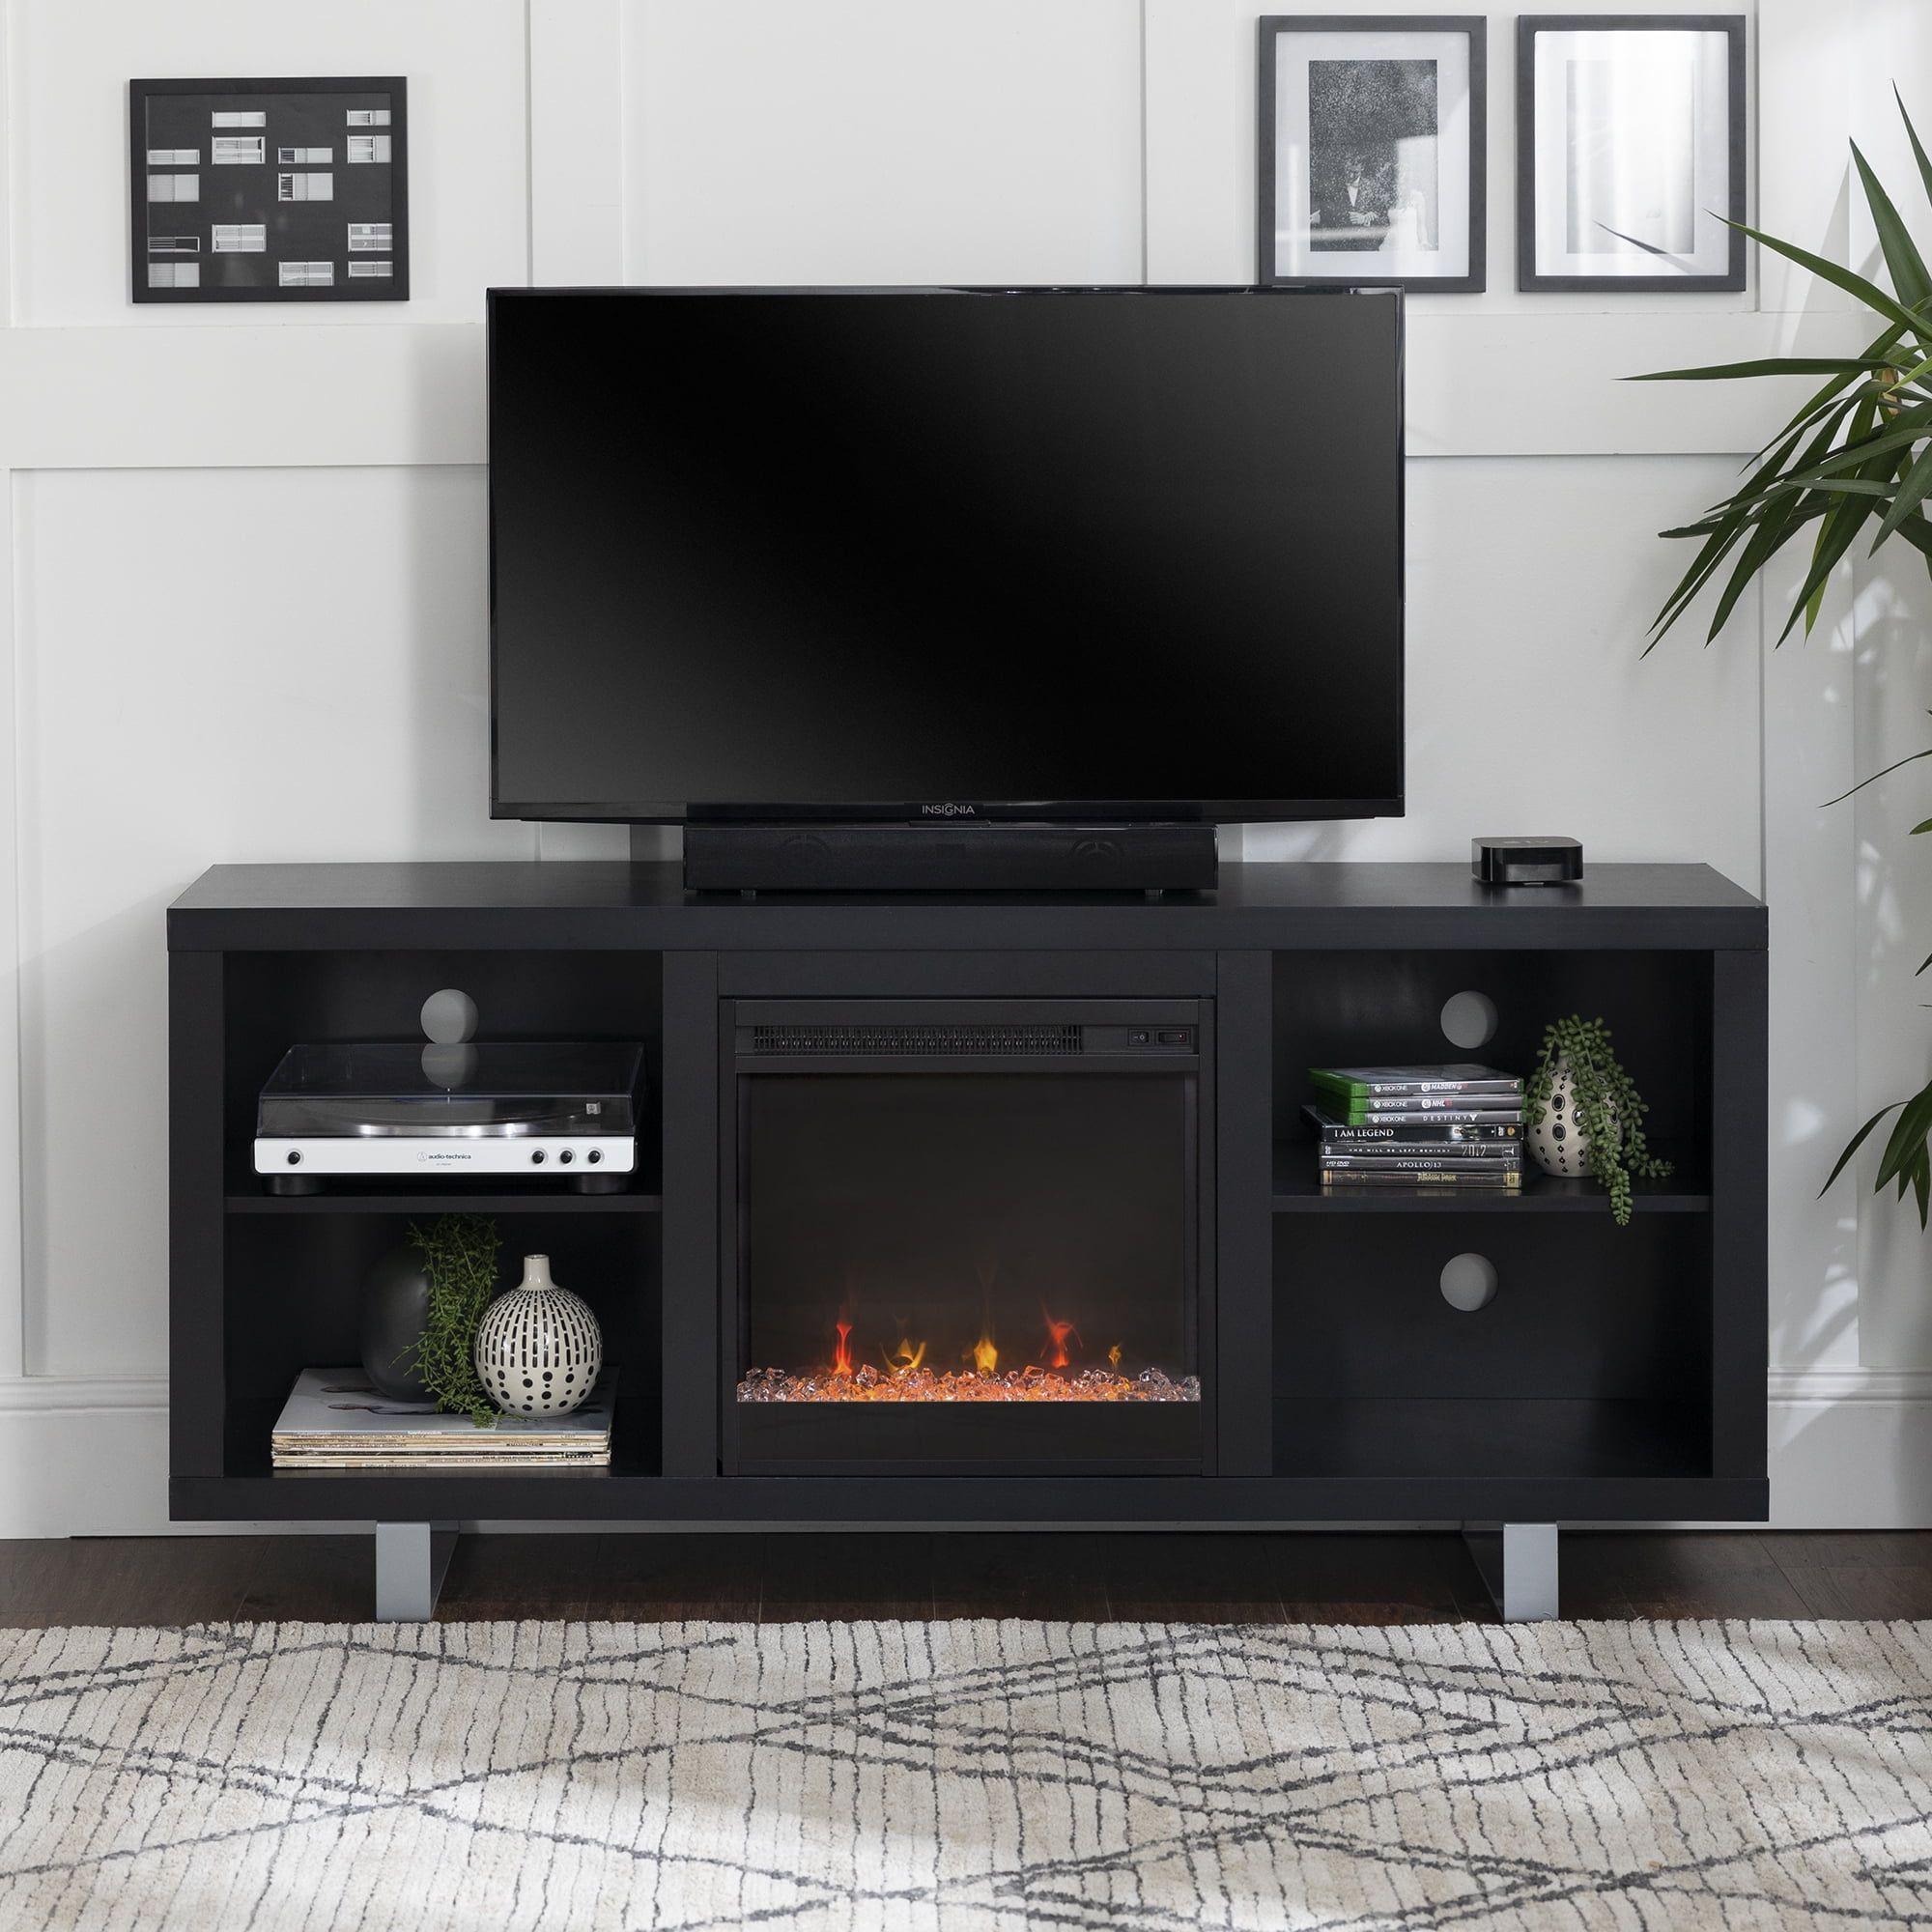 Manor Park Modern Fireplace Tv Stand For Tvs Up To 64", Black – Walmart In Modern Fireplace Tv Stands (View 16 of 20)